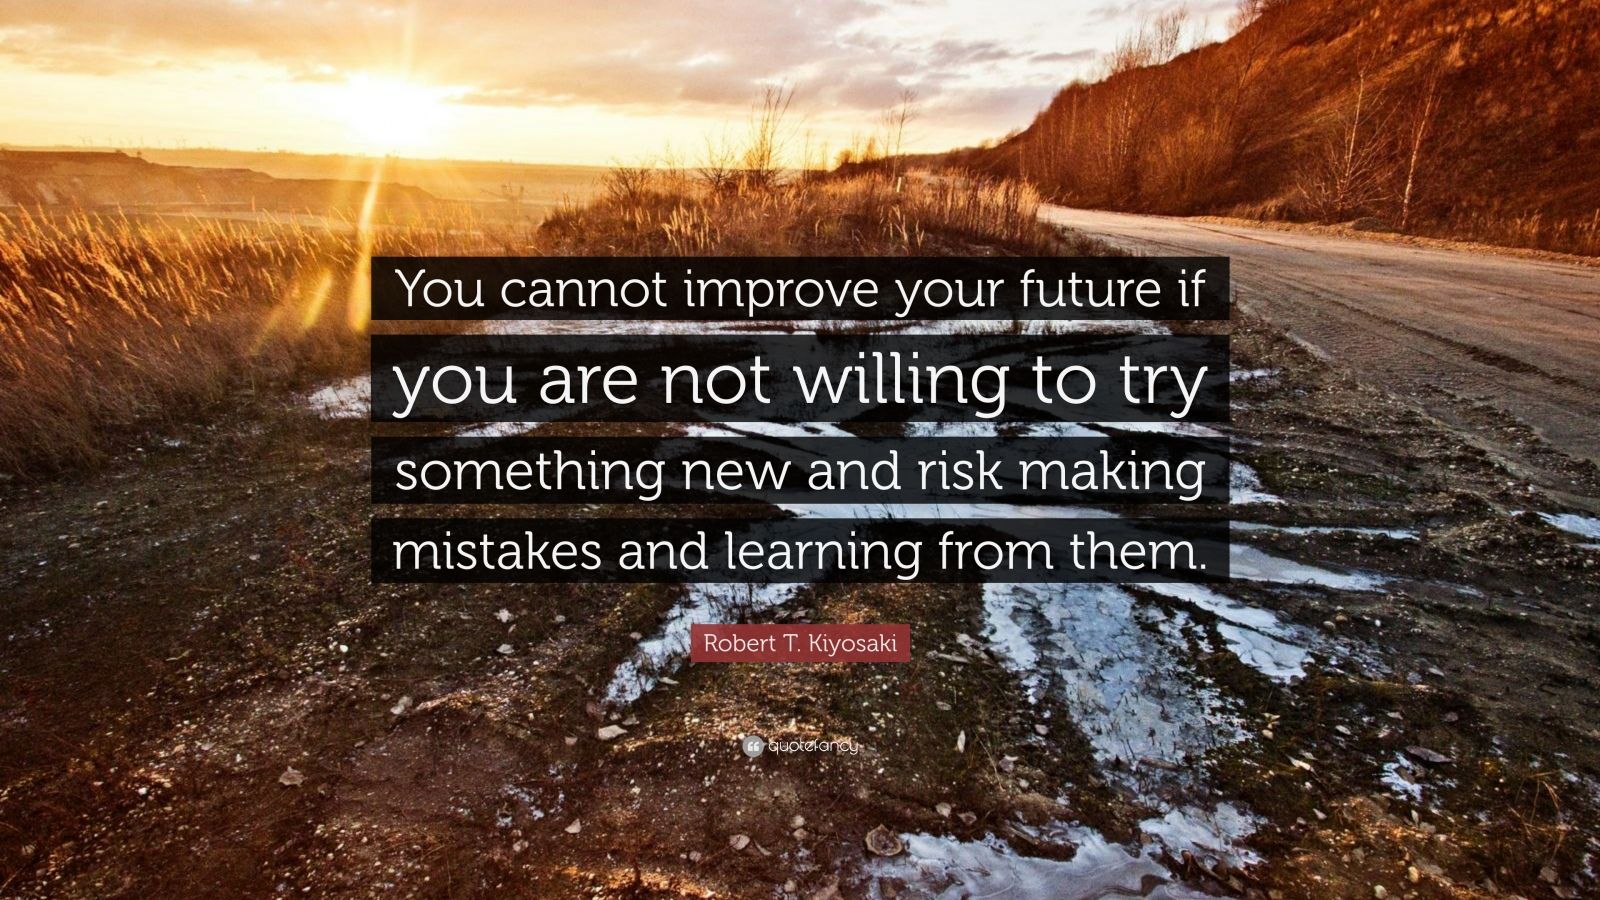 Robert T. Kiyosaki Quote: “You cannot improve your future if you are